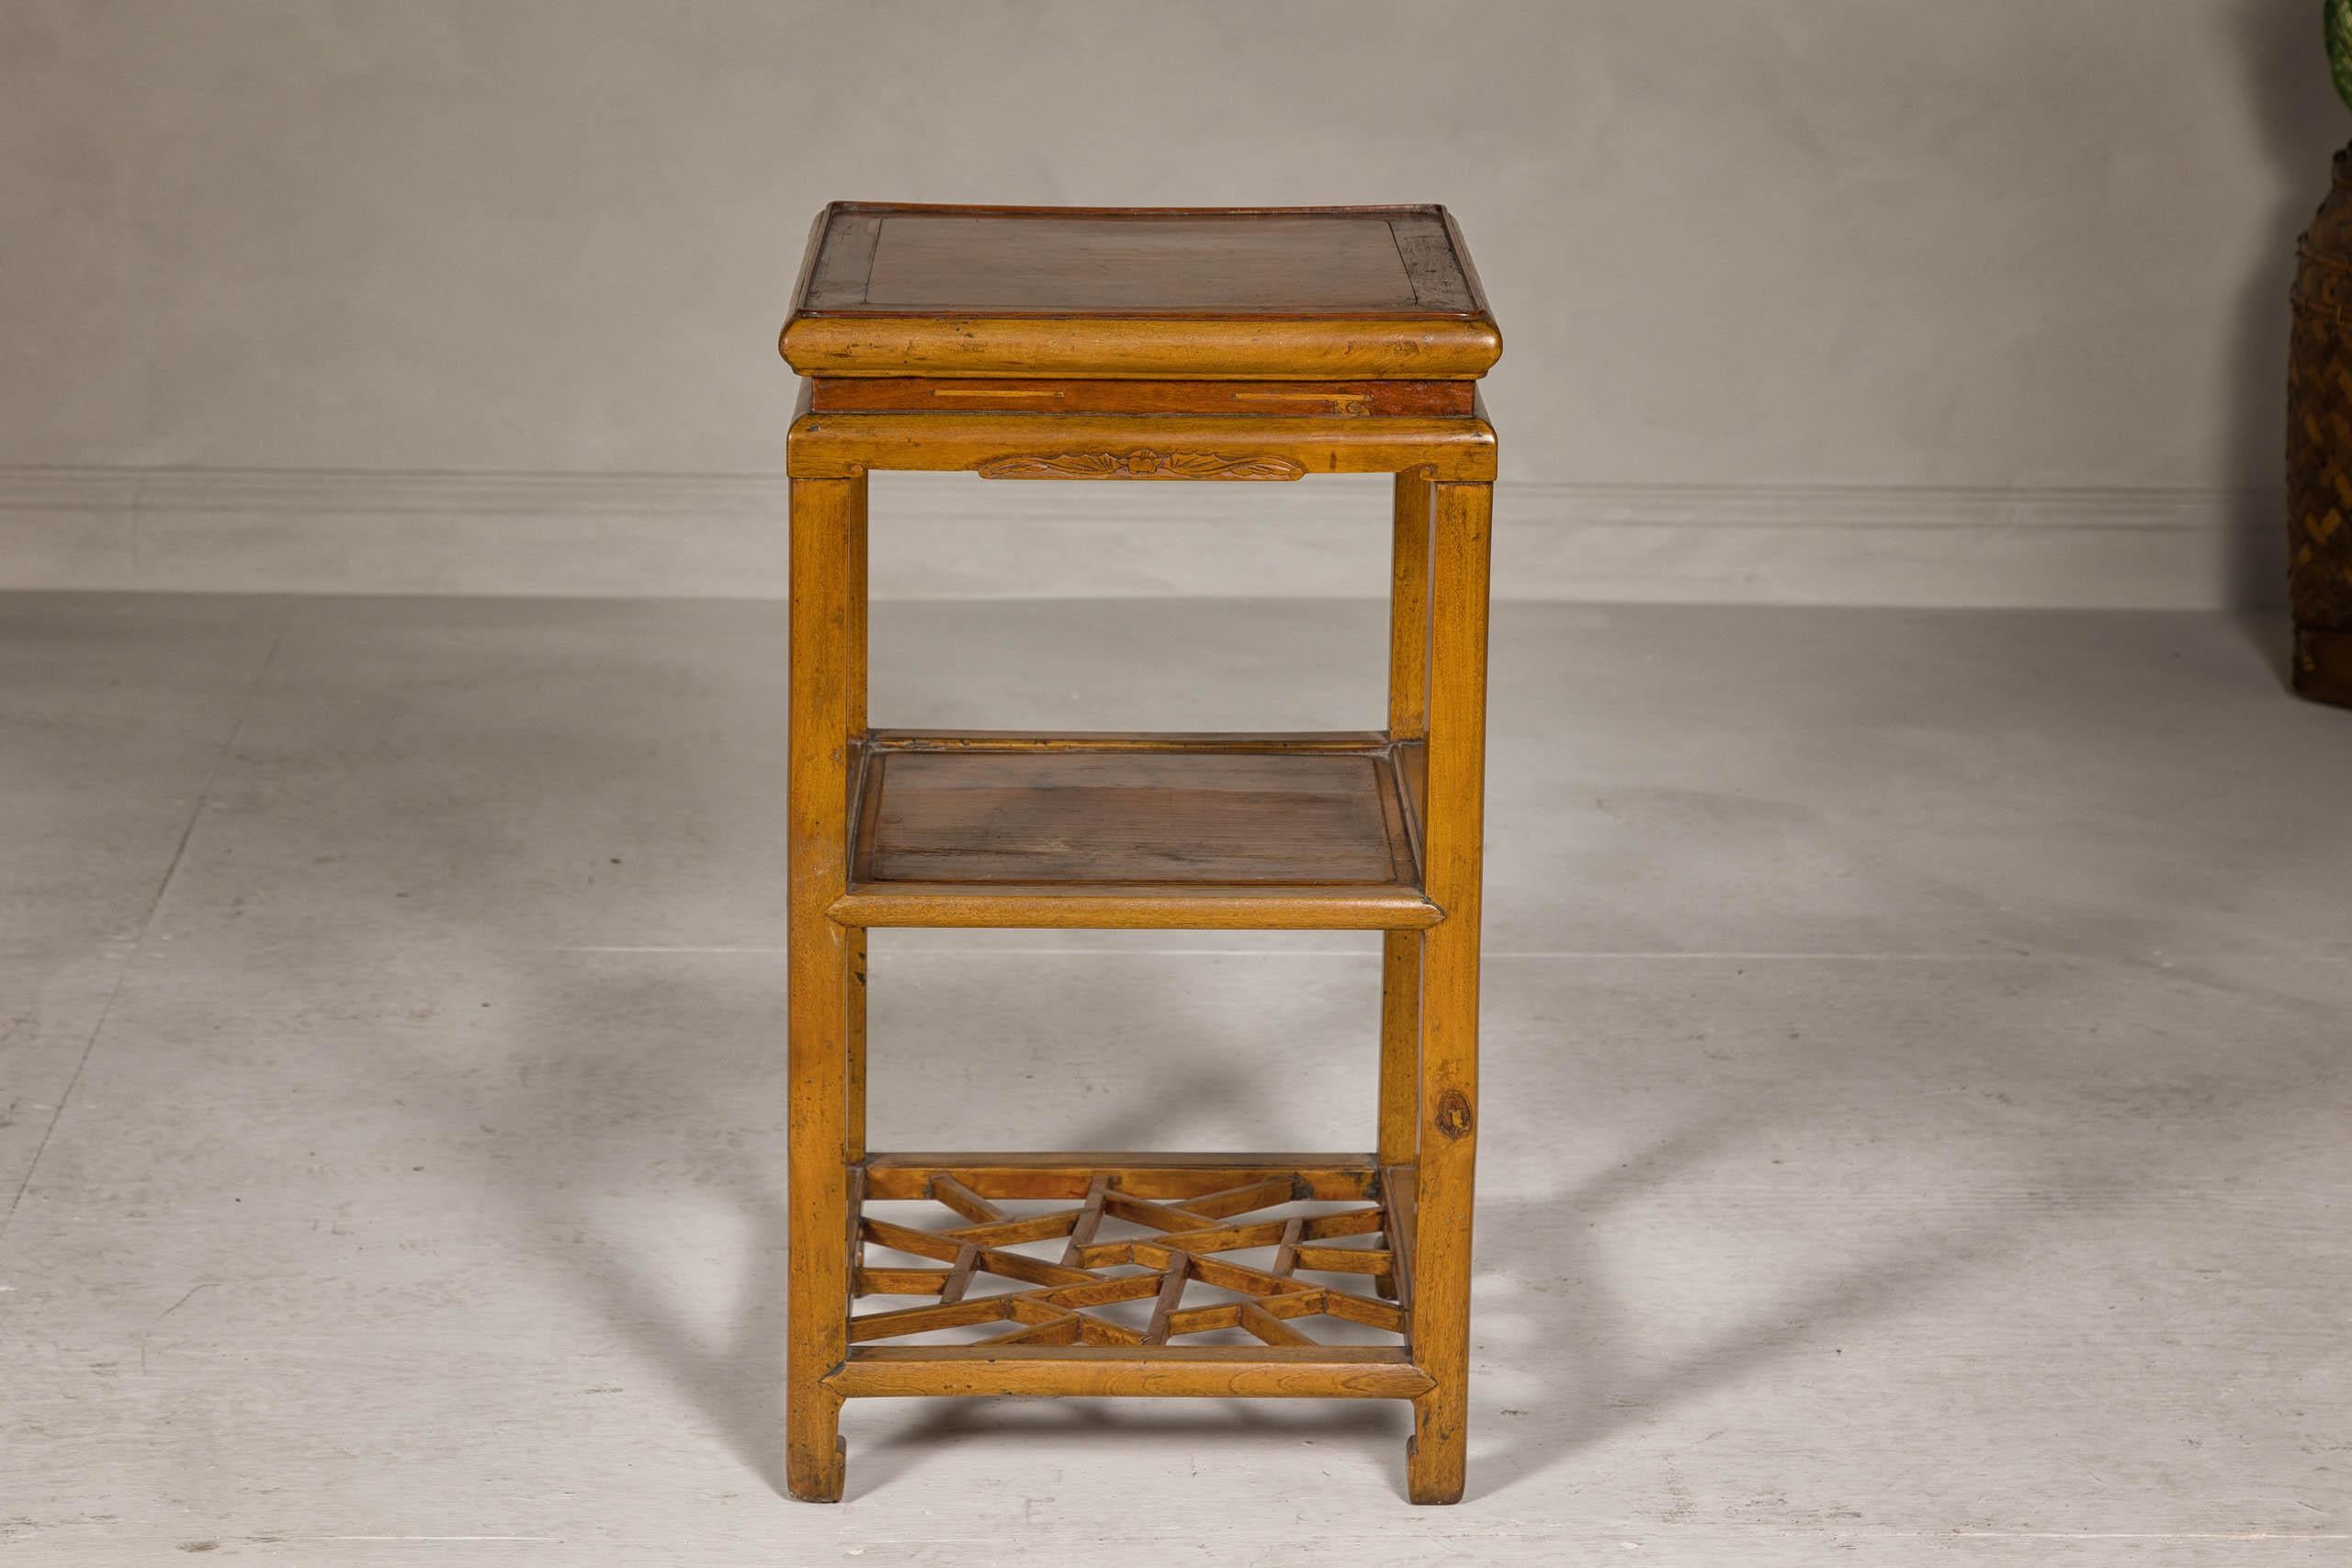 Fretwork Qing Dynasty Three-Tier Accent Lamp Table with Geometric Shelf For Sale